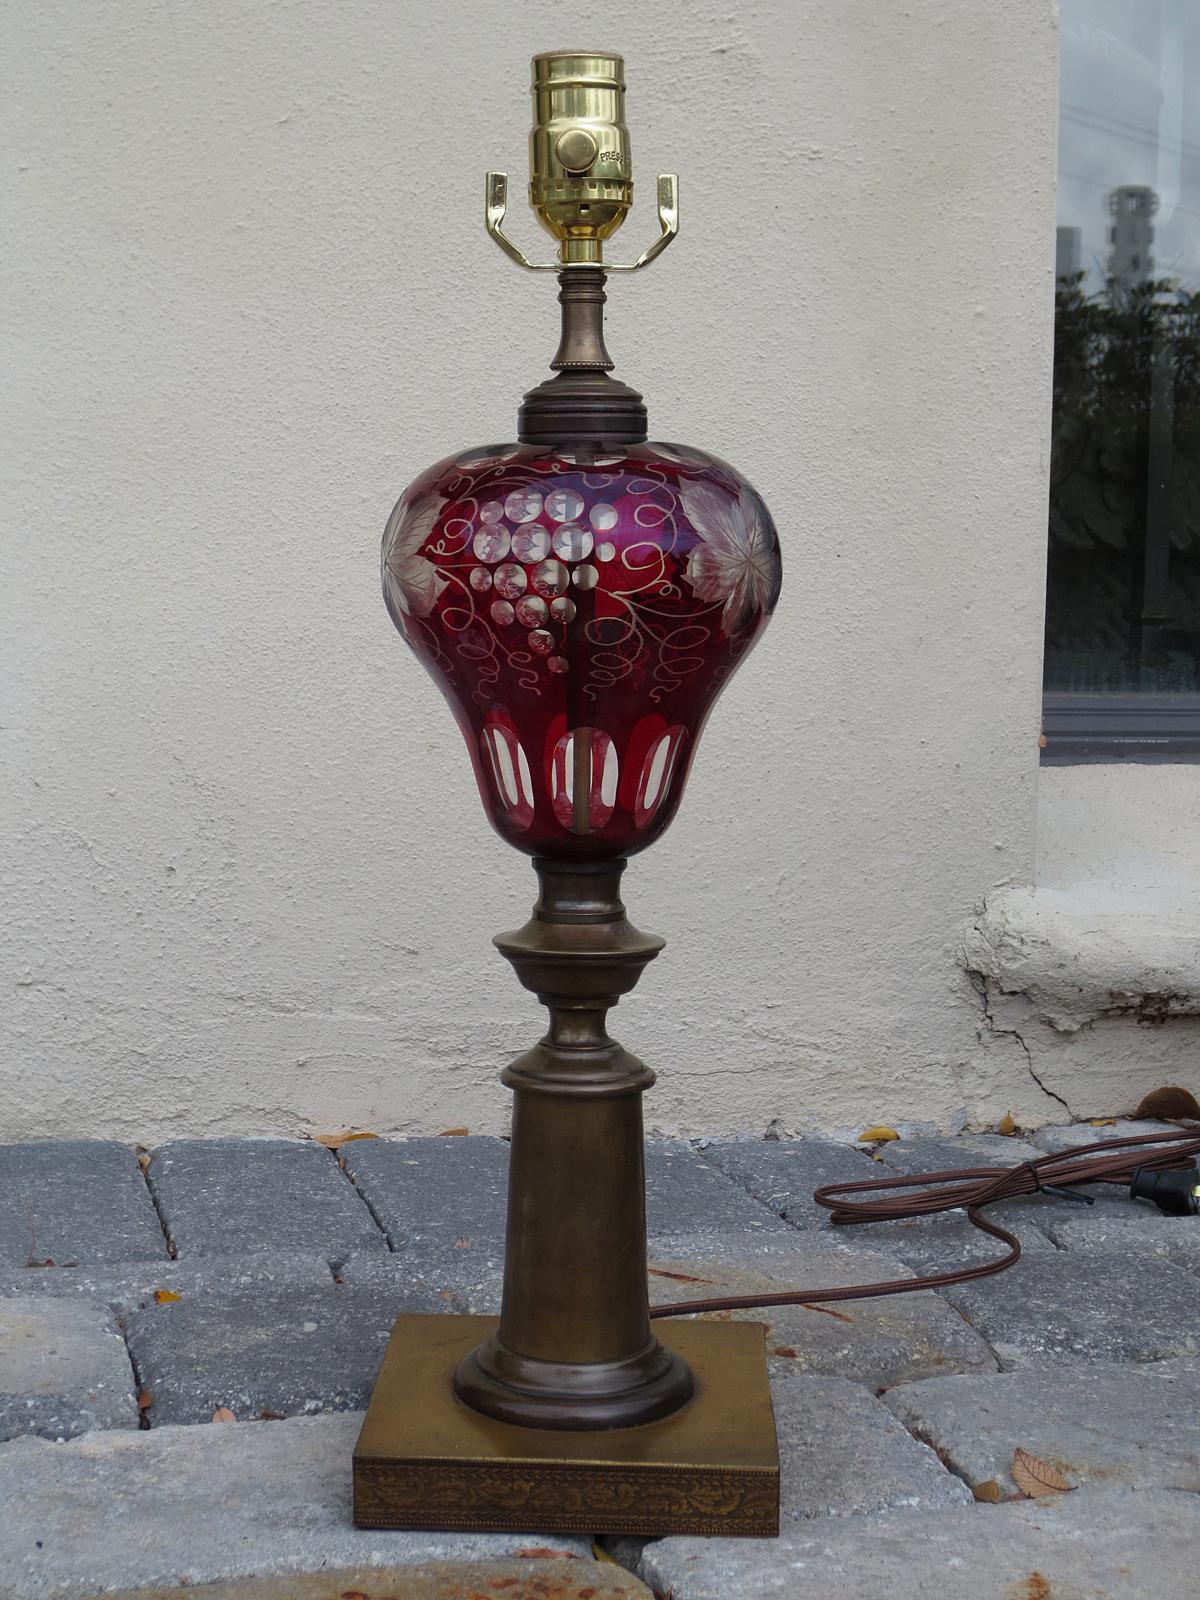 19th-early 20th century red cut to clear glass lamp on bronze base.
New wiring.